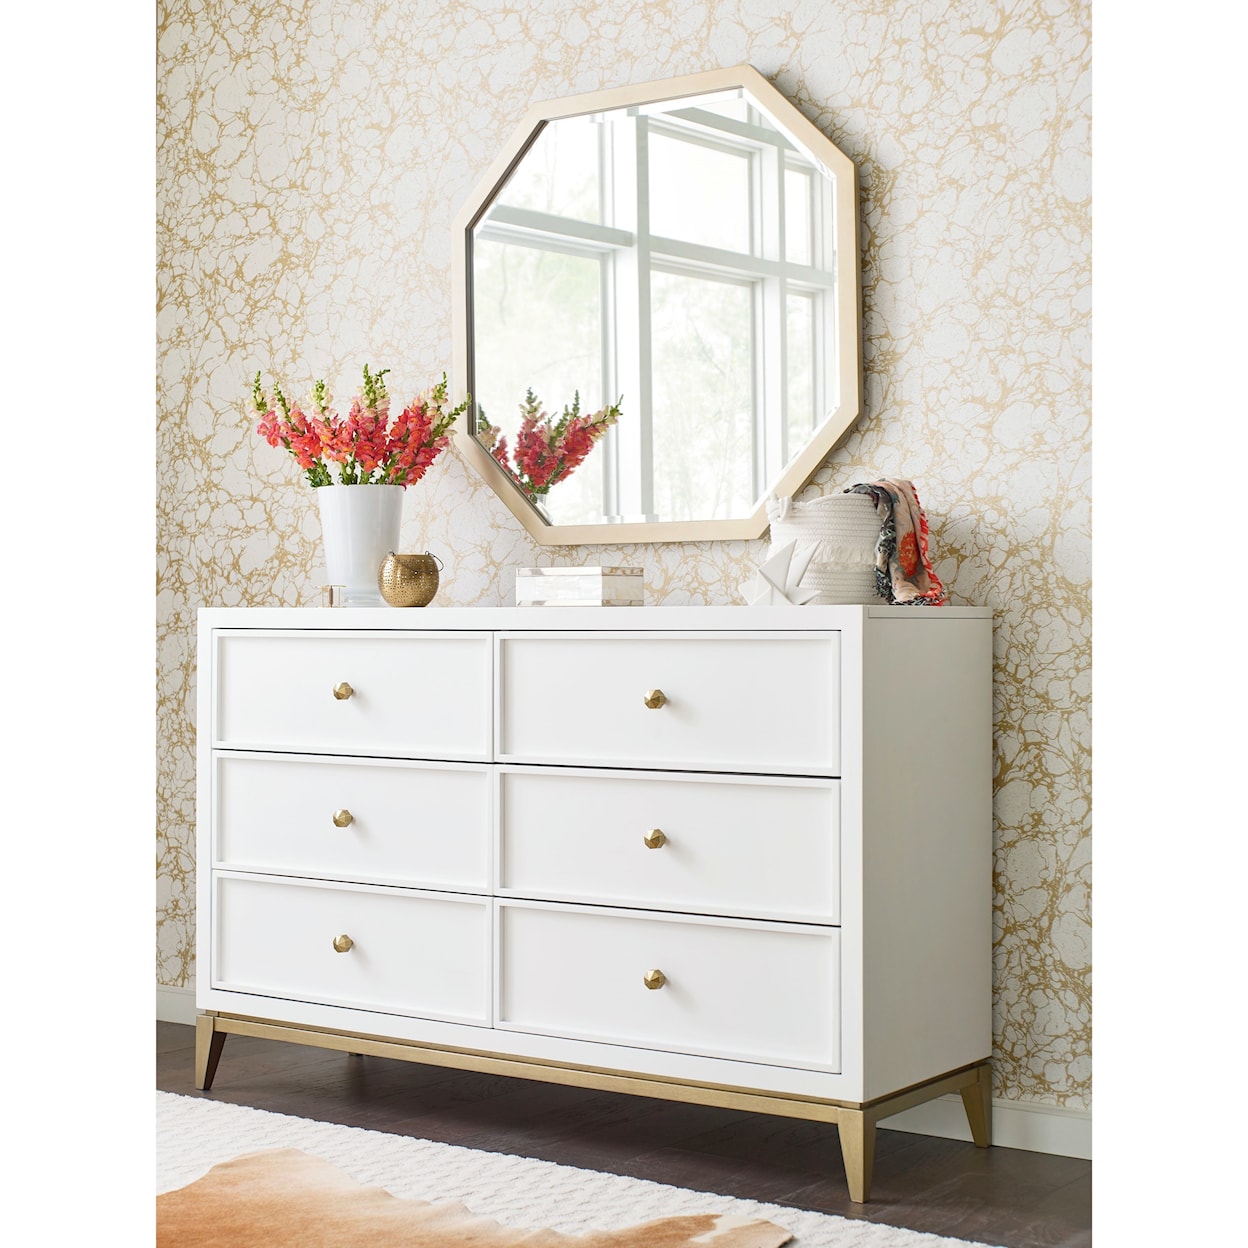 Rachael Ray Home Alexis Dresser and Mirror Set